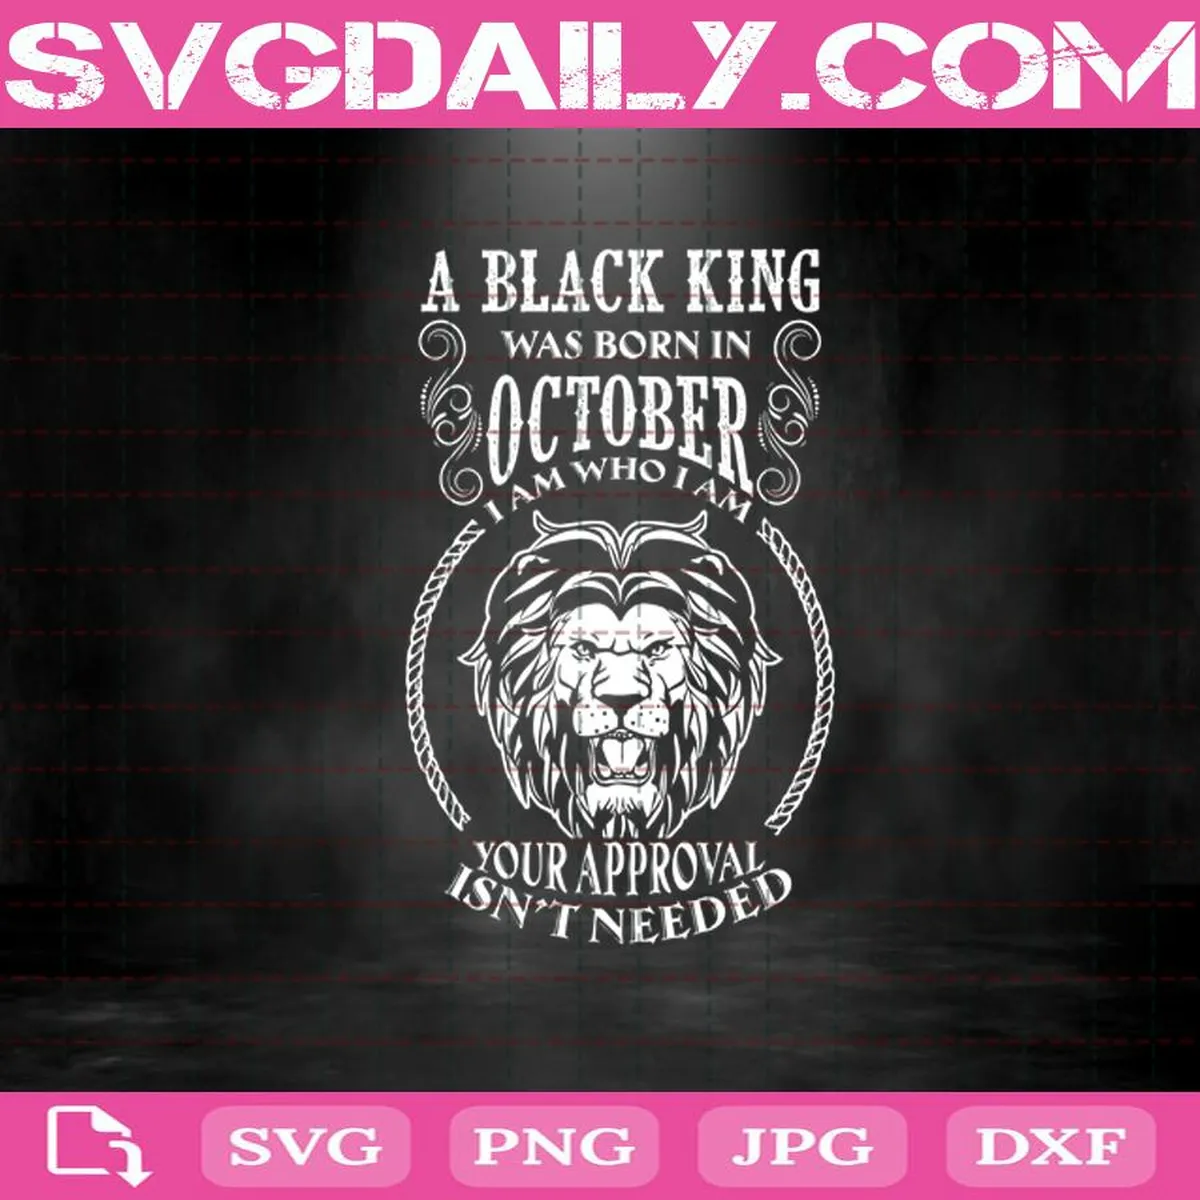 A Black King Was Born In October I Am Who I Am Your Approval Isn't Needed Svg, A Black King Svg, October Svg, Was Born In October Svg